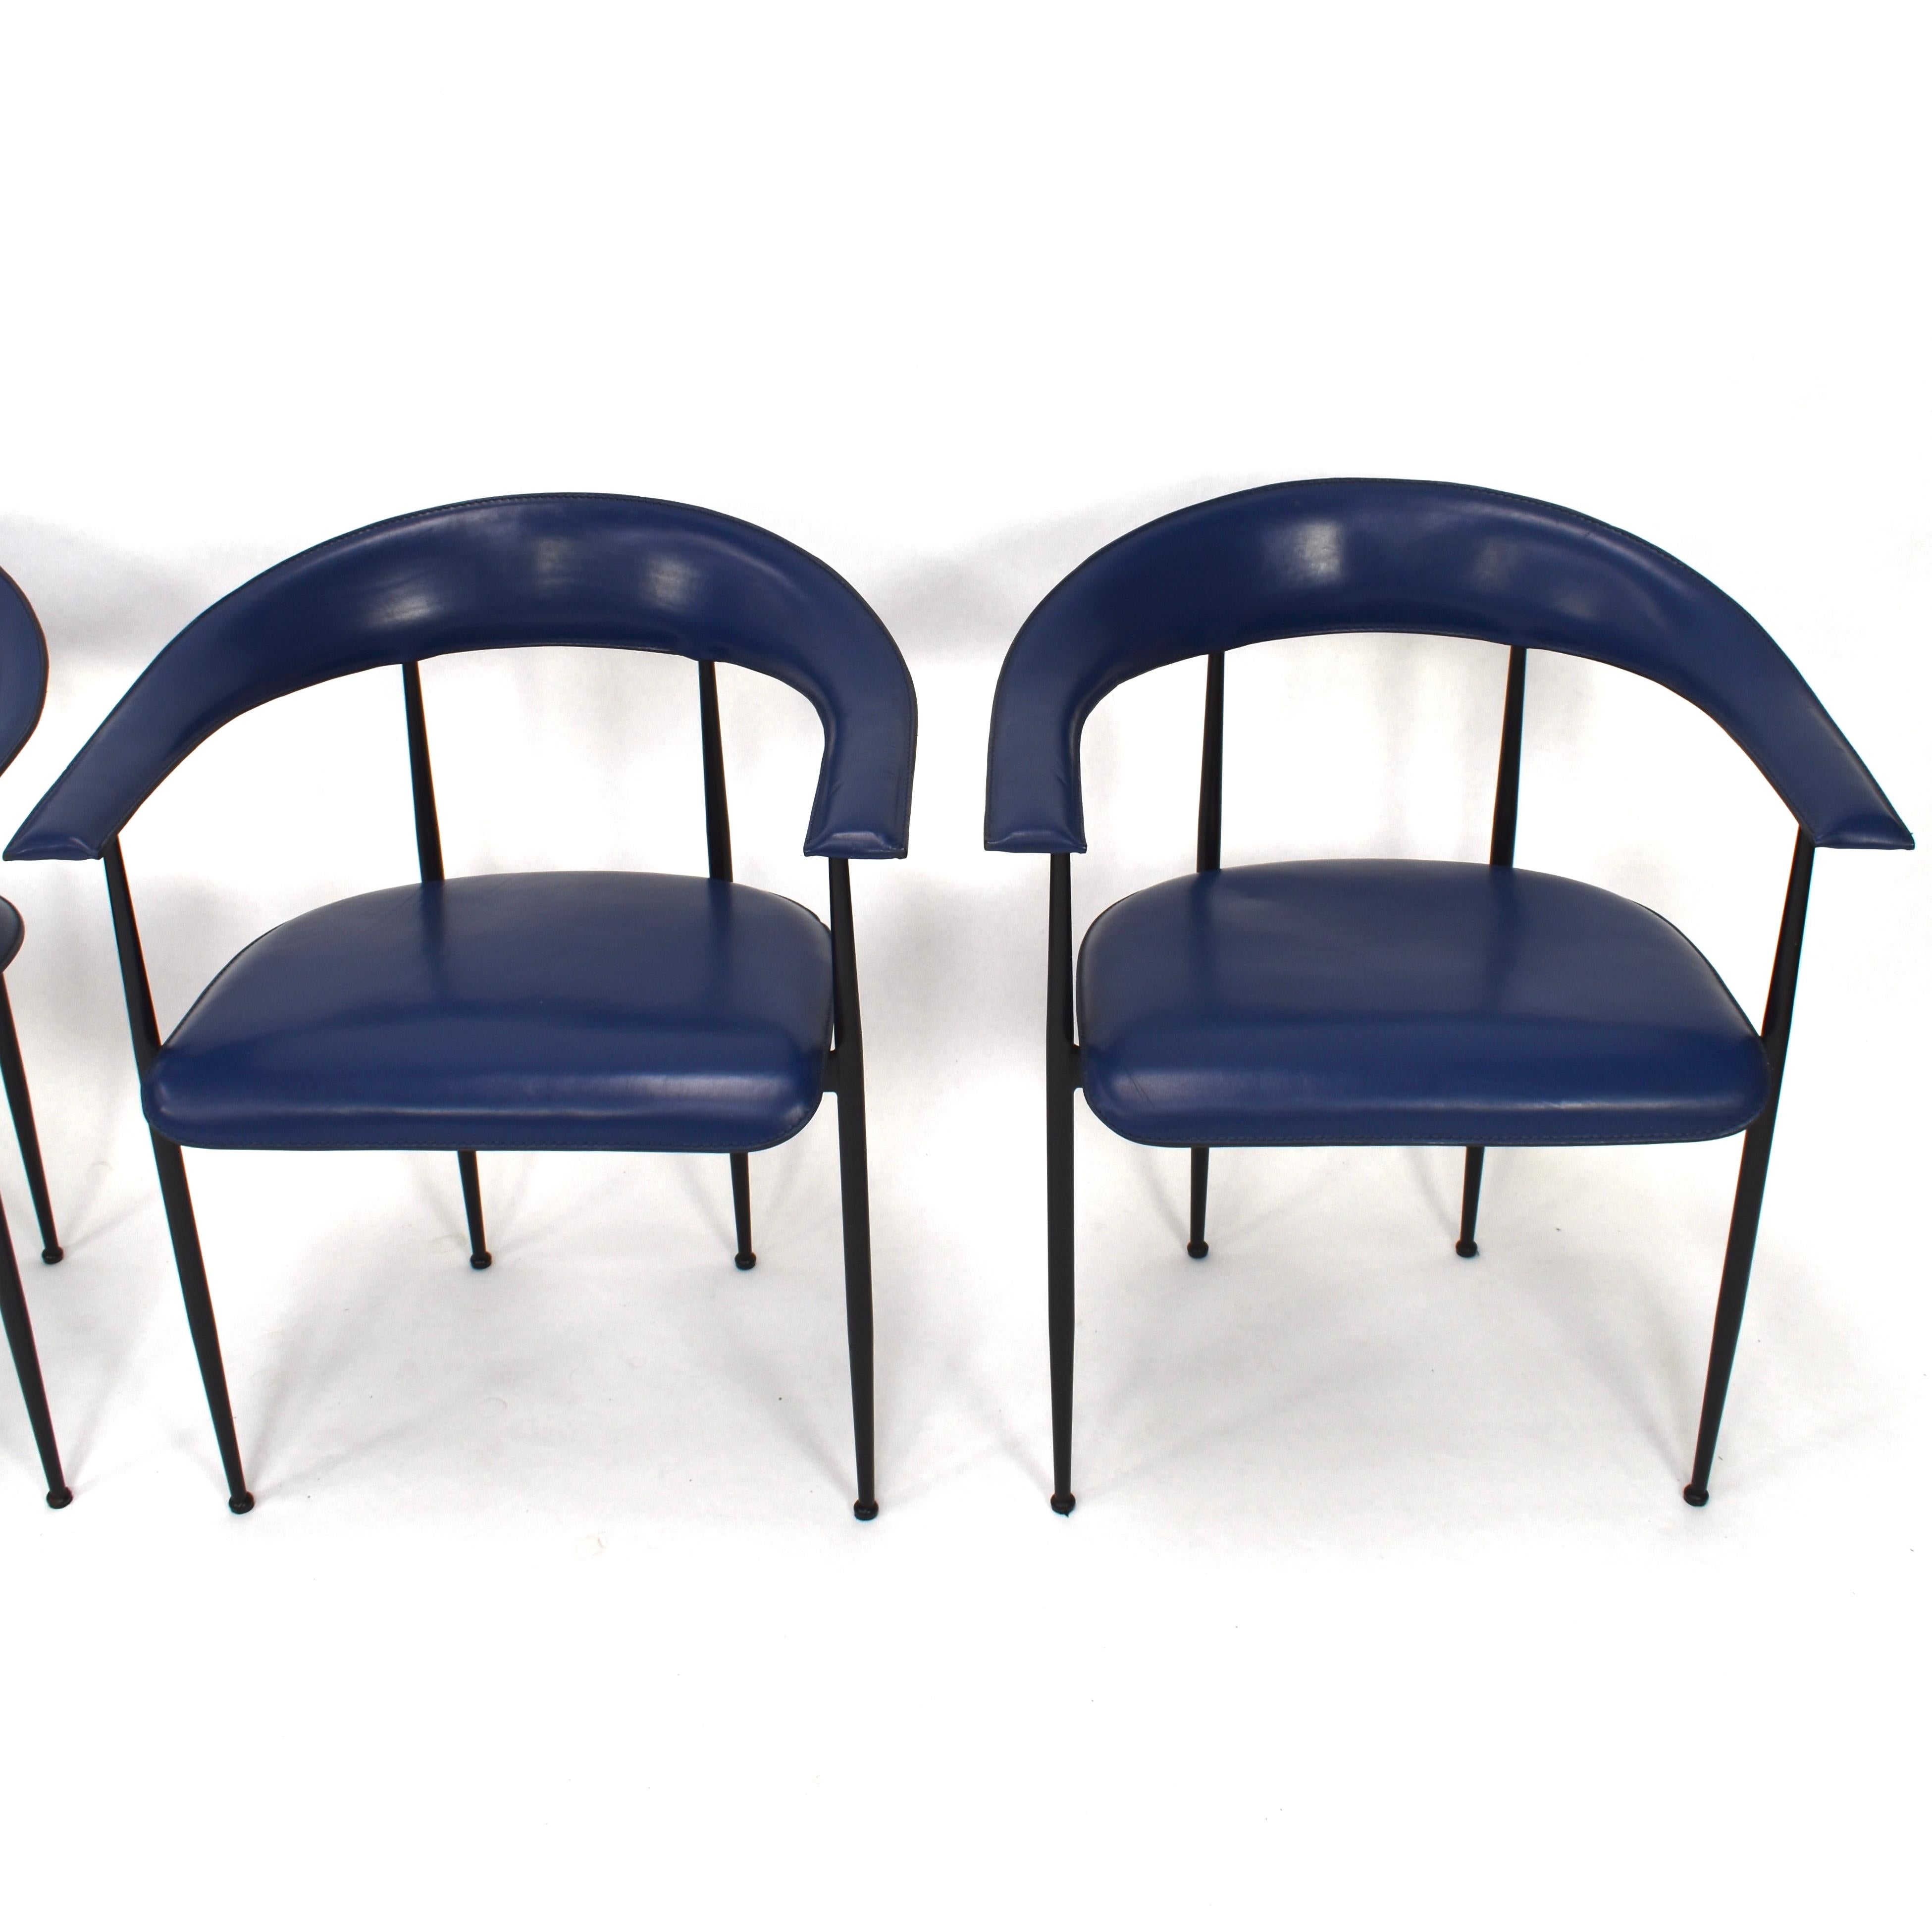 Italian Set of 4 Fasem P40 Leather Dining Chairs by Vegni and Gualtierotti, Italy